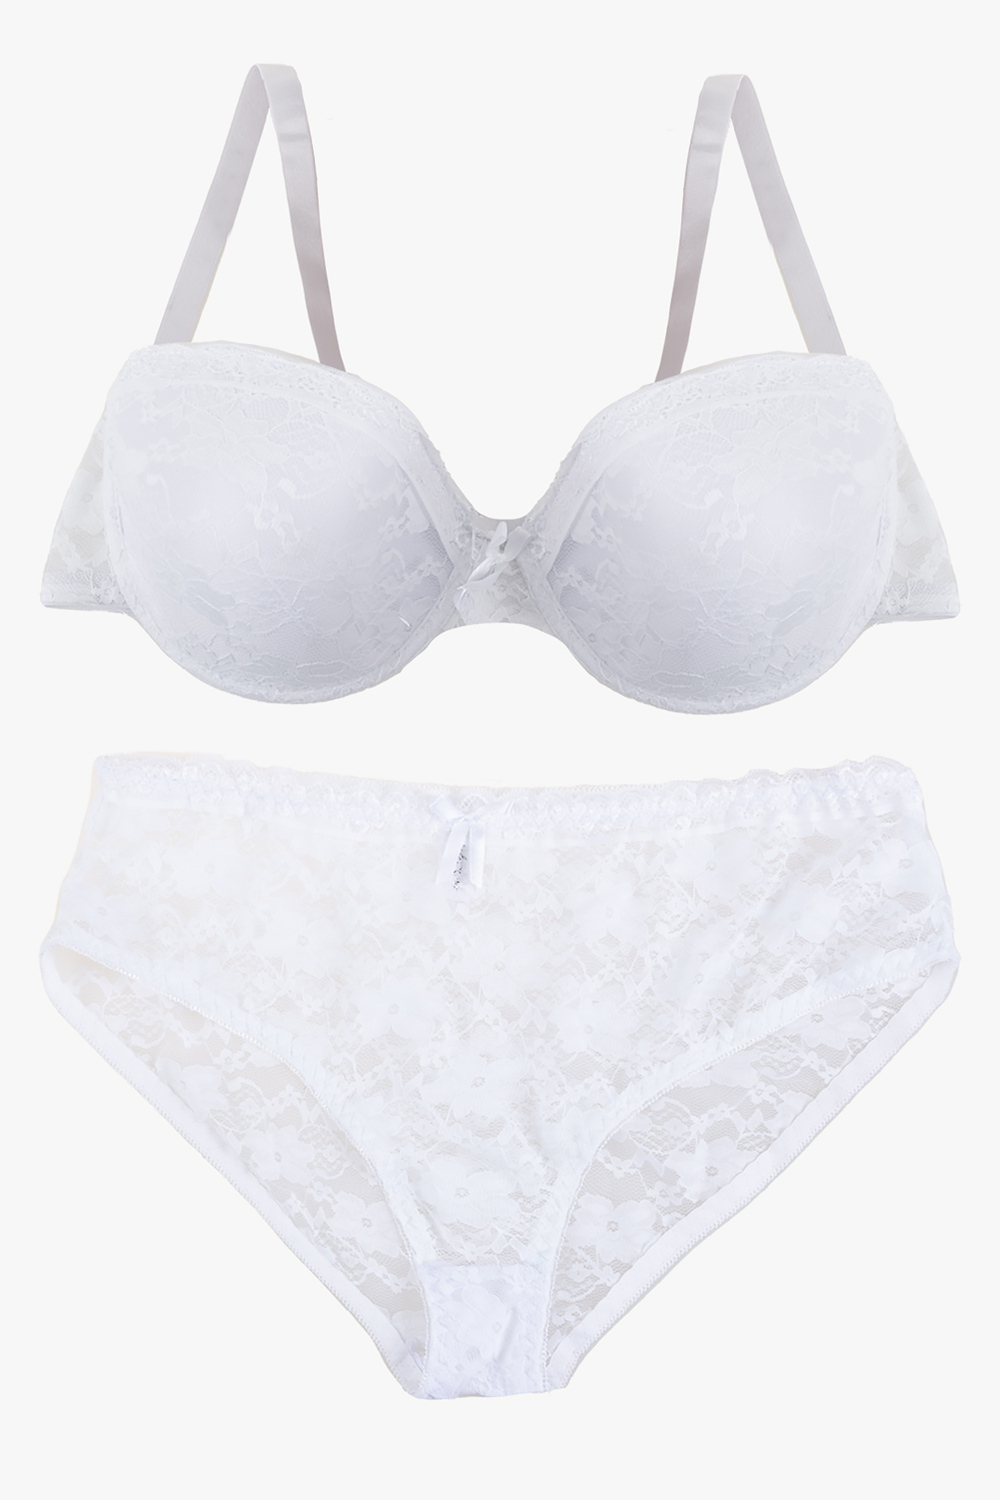 White Lace plunge lingerie set: bra and panties in off-white